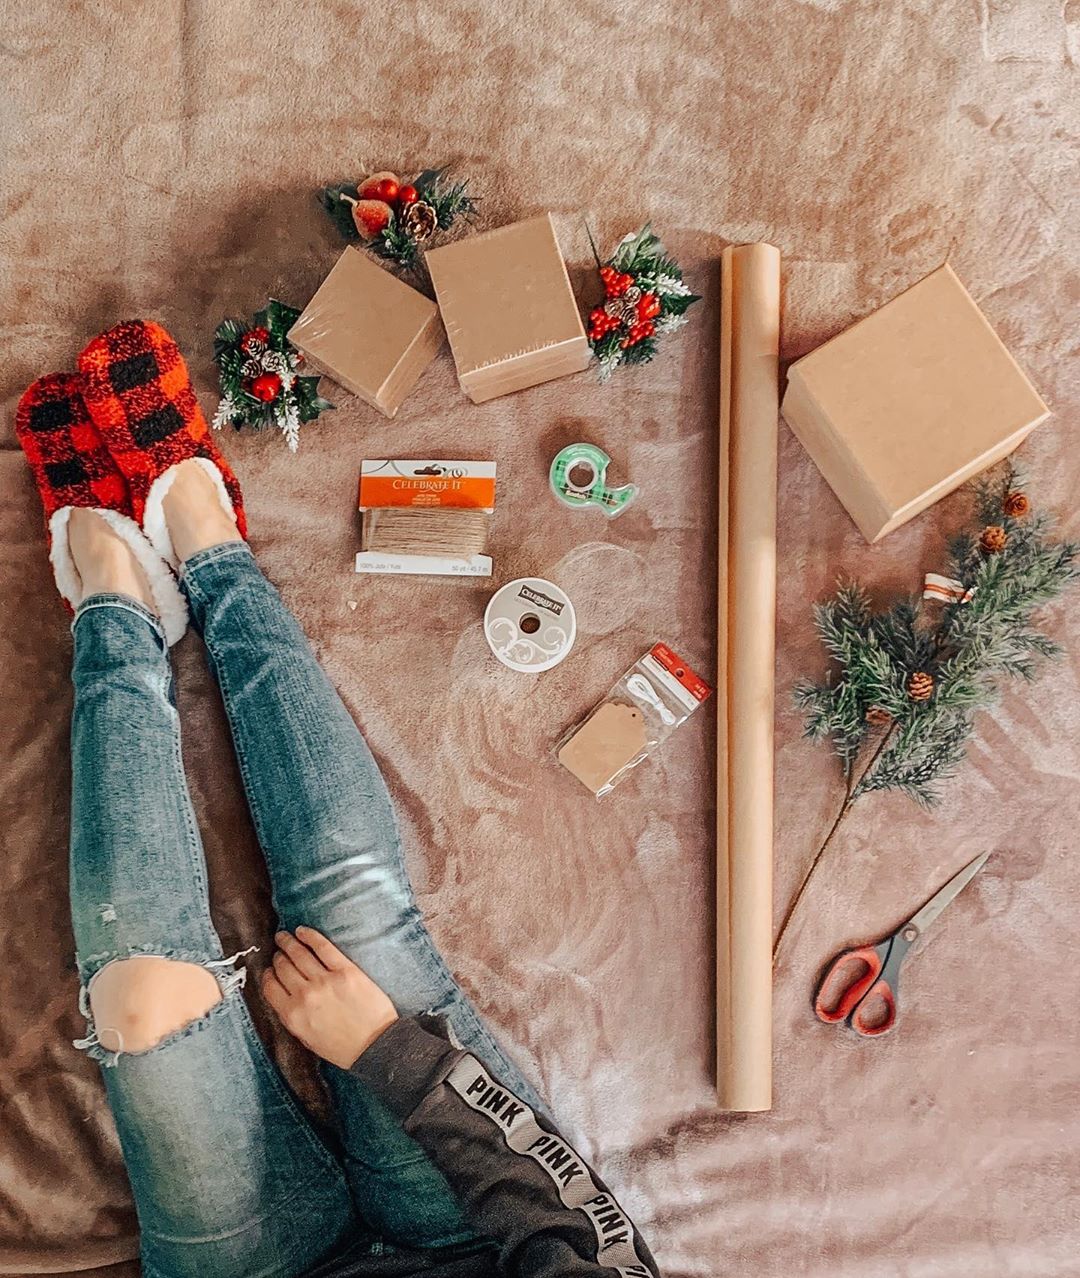 Girl in jeans wrapping presents. Photo by Instagram user @thisiscaitk